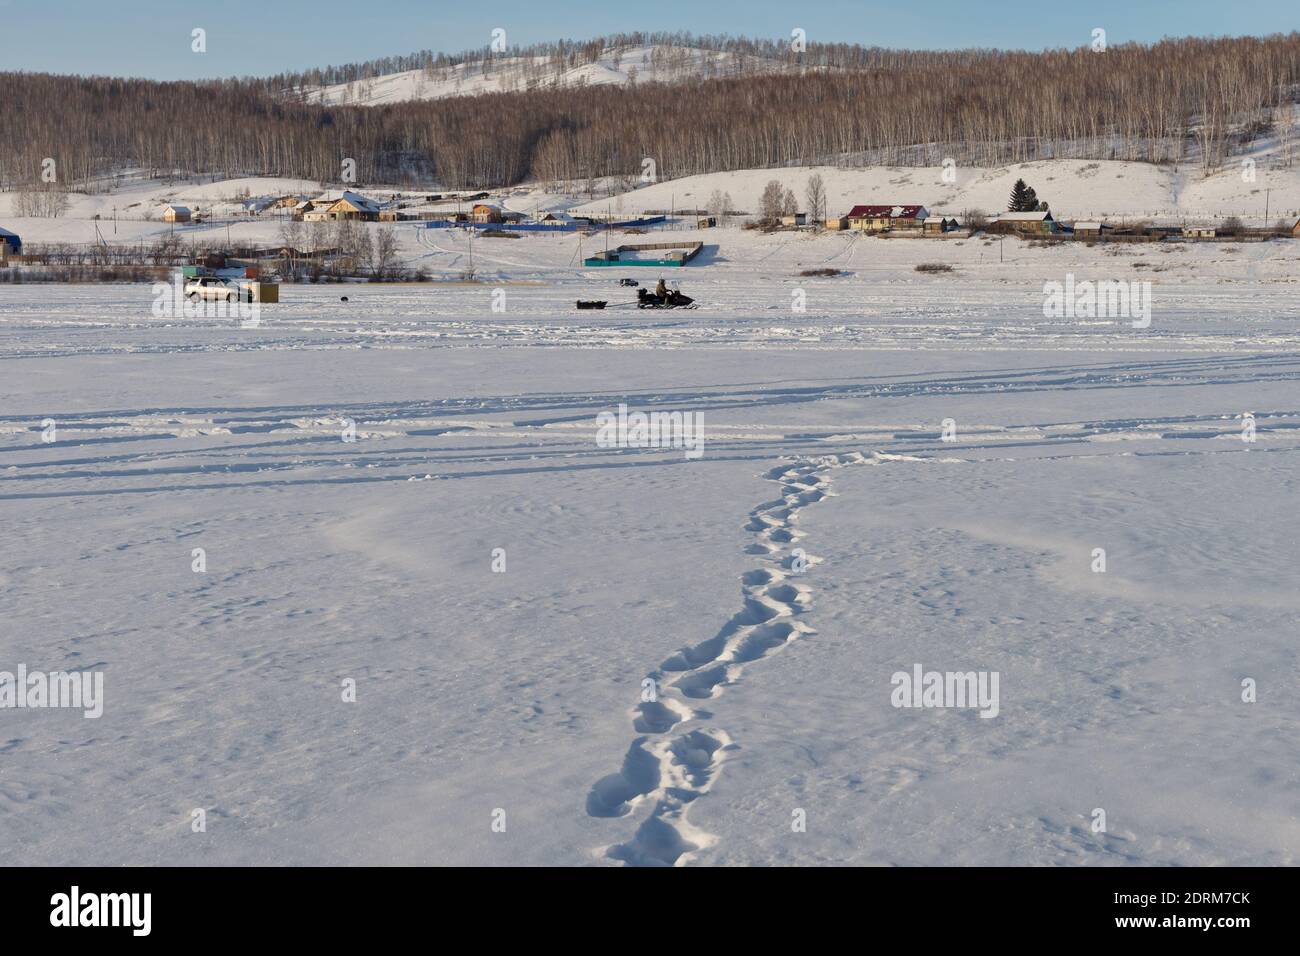 Human footprints lead to the rural shore along the frozen snow-covered surface of a large lake. Stock Photo